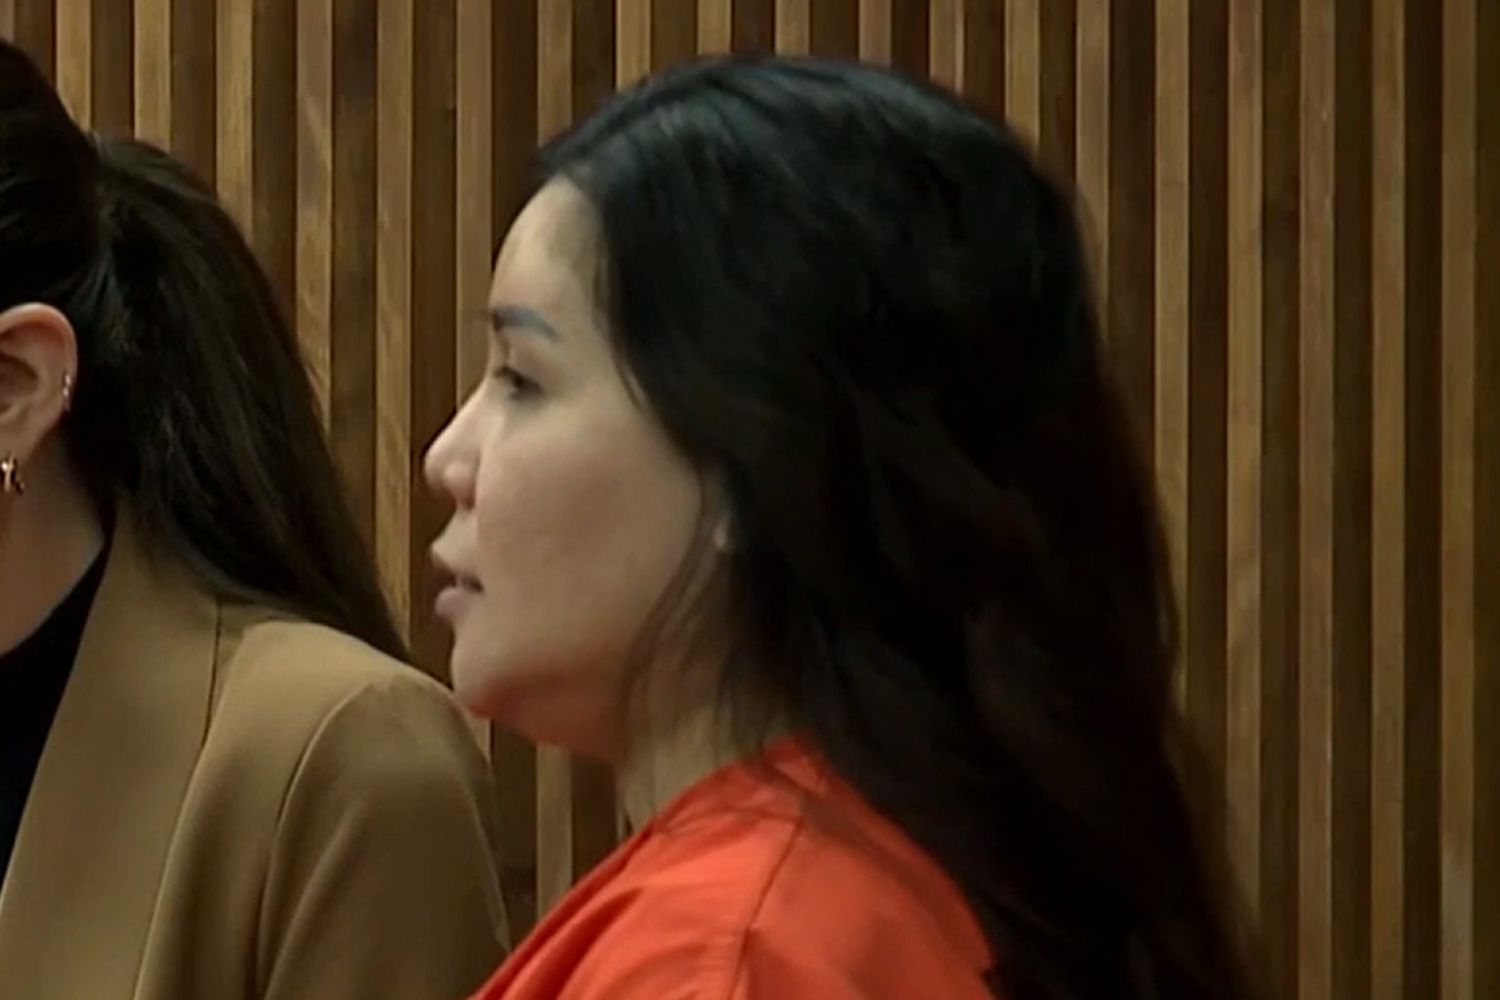 Arizona Woman Who Tried to Kill Husband with Poisoned Coffee Gets Probation [Video]